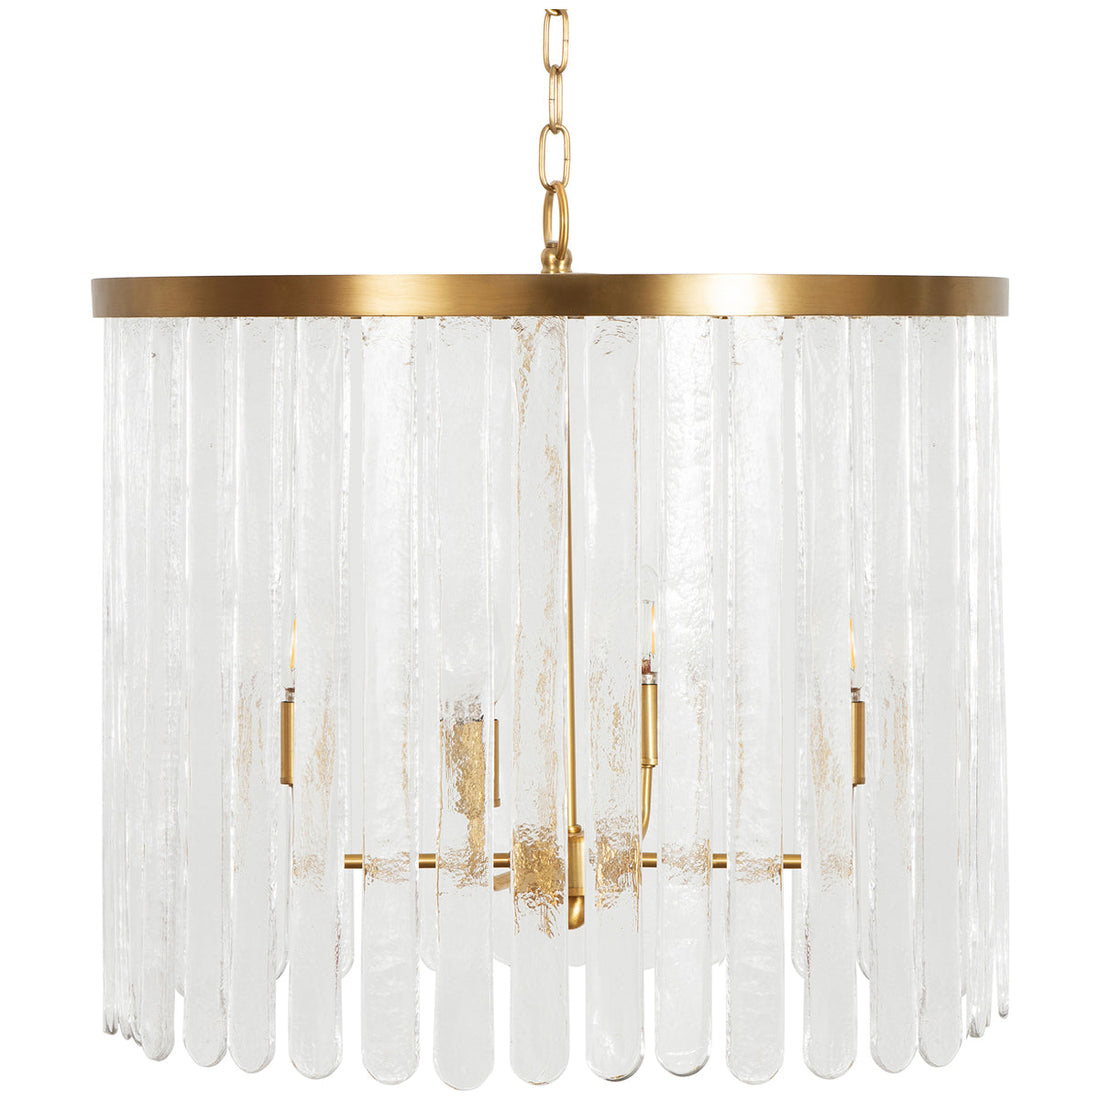 Worlds Away 4-Light Hanging Textured Glass Pendant in Brushed Brass